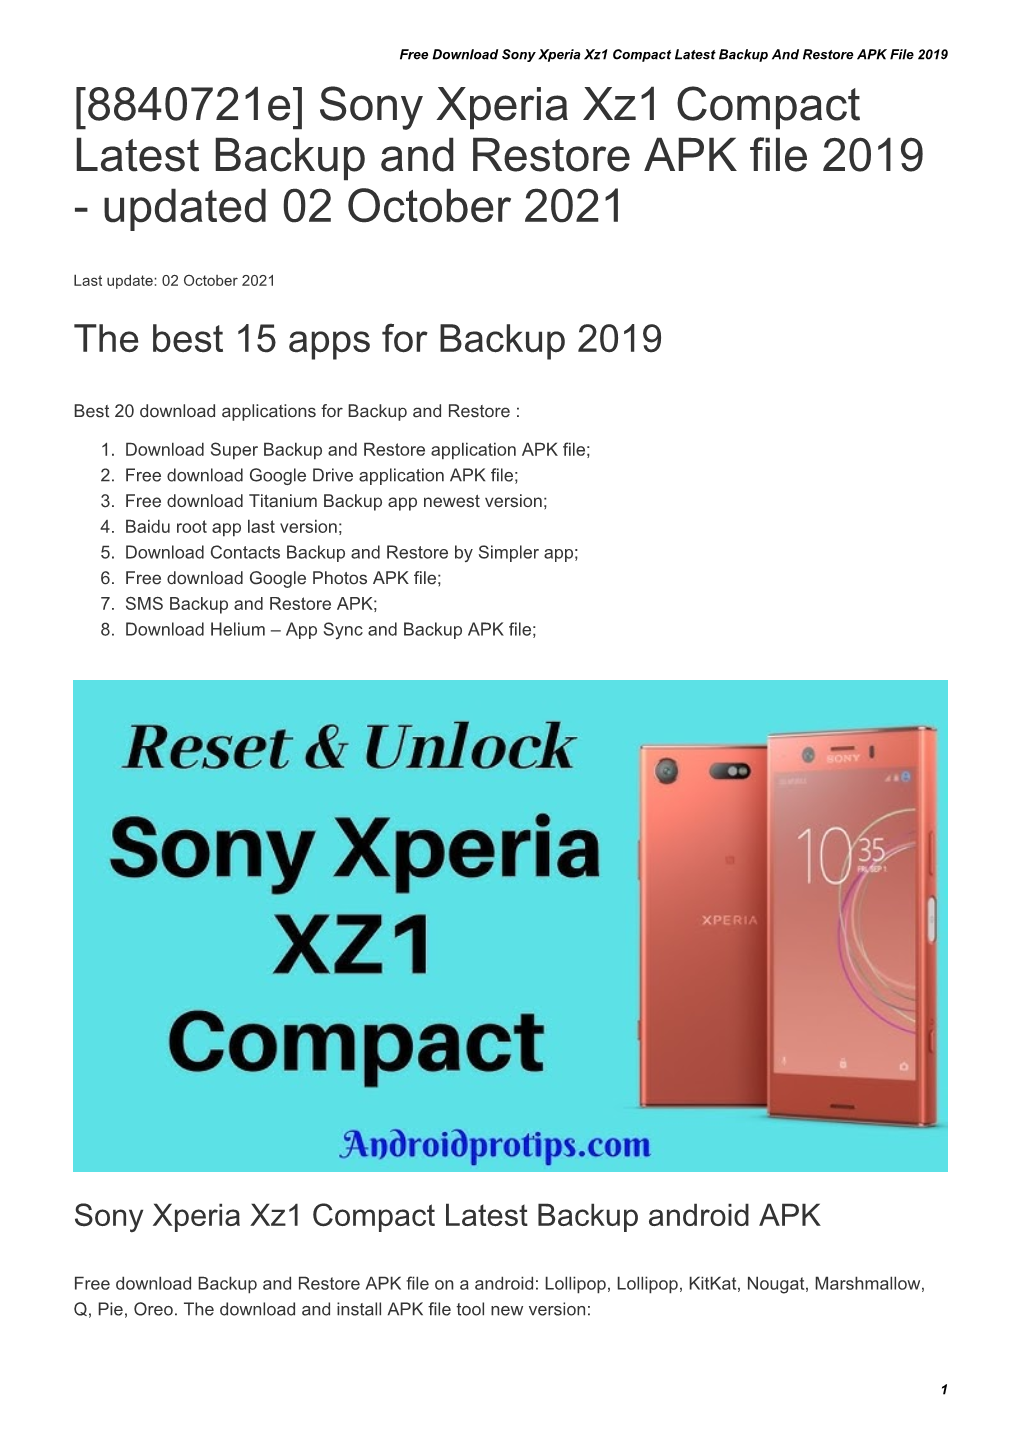 Sony Xperia Xz1 Compact Latest Backup and Restore APK File 2019 [8840721E] Sony Xperia Xz1 Compact Latest Backup and Restore APK File 2019 - Updated 02 October 2021